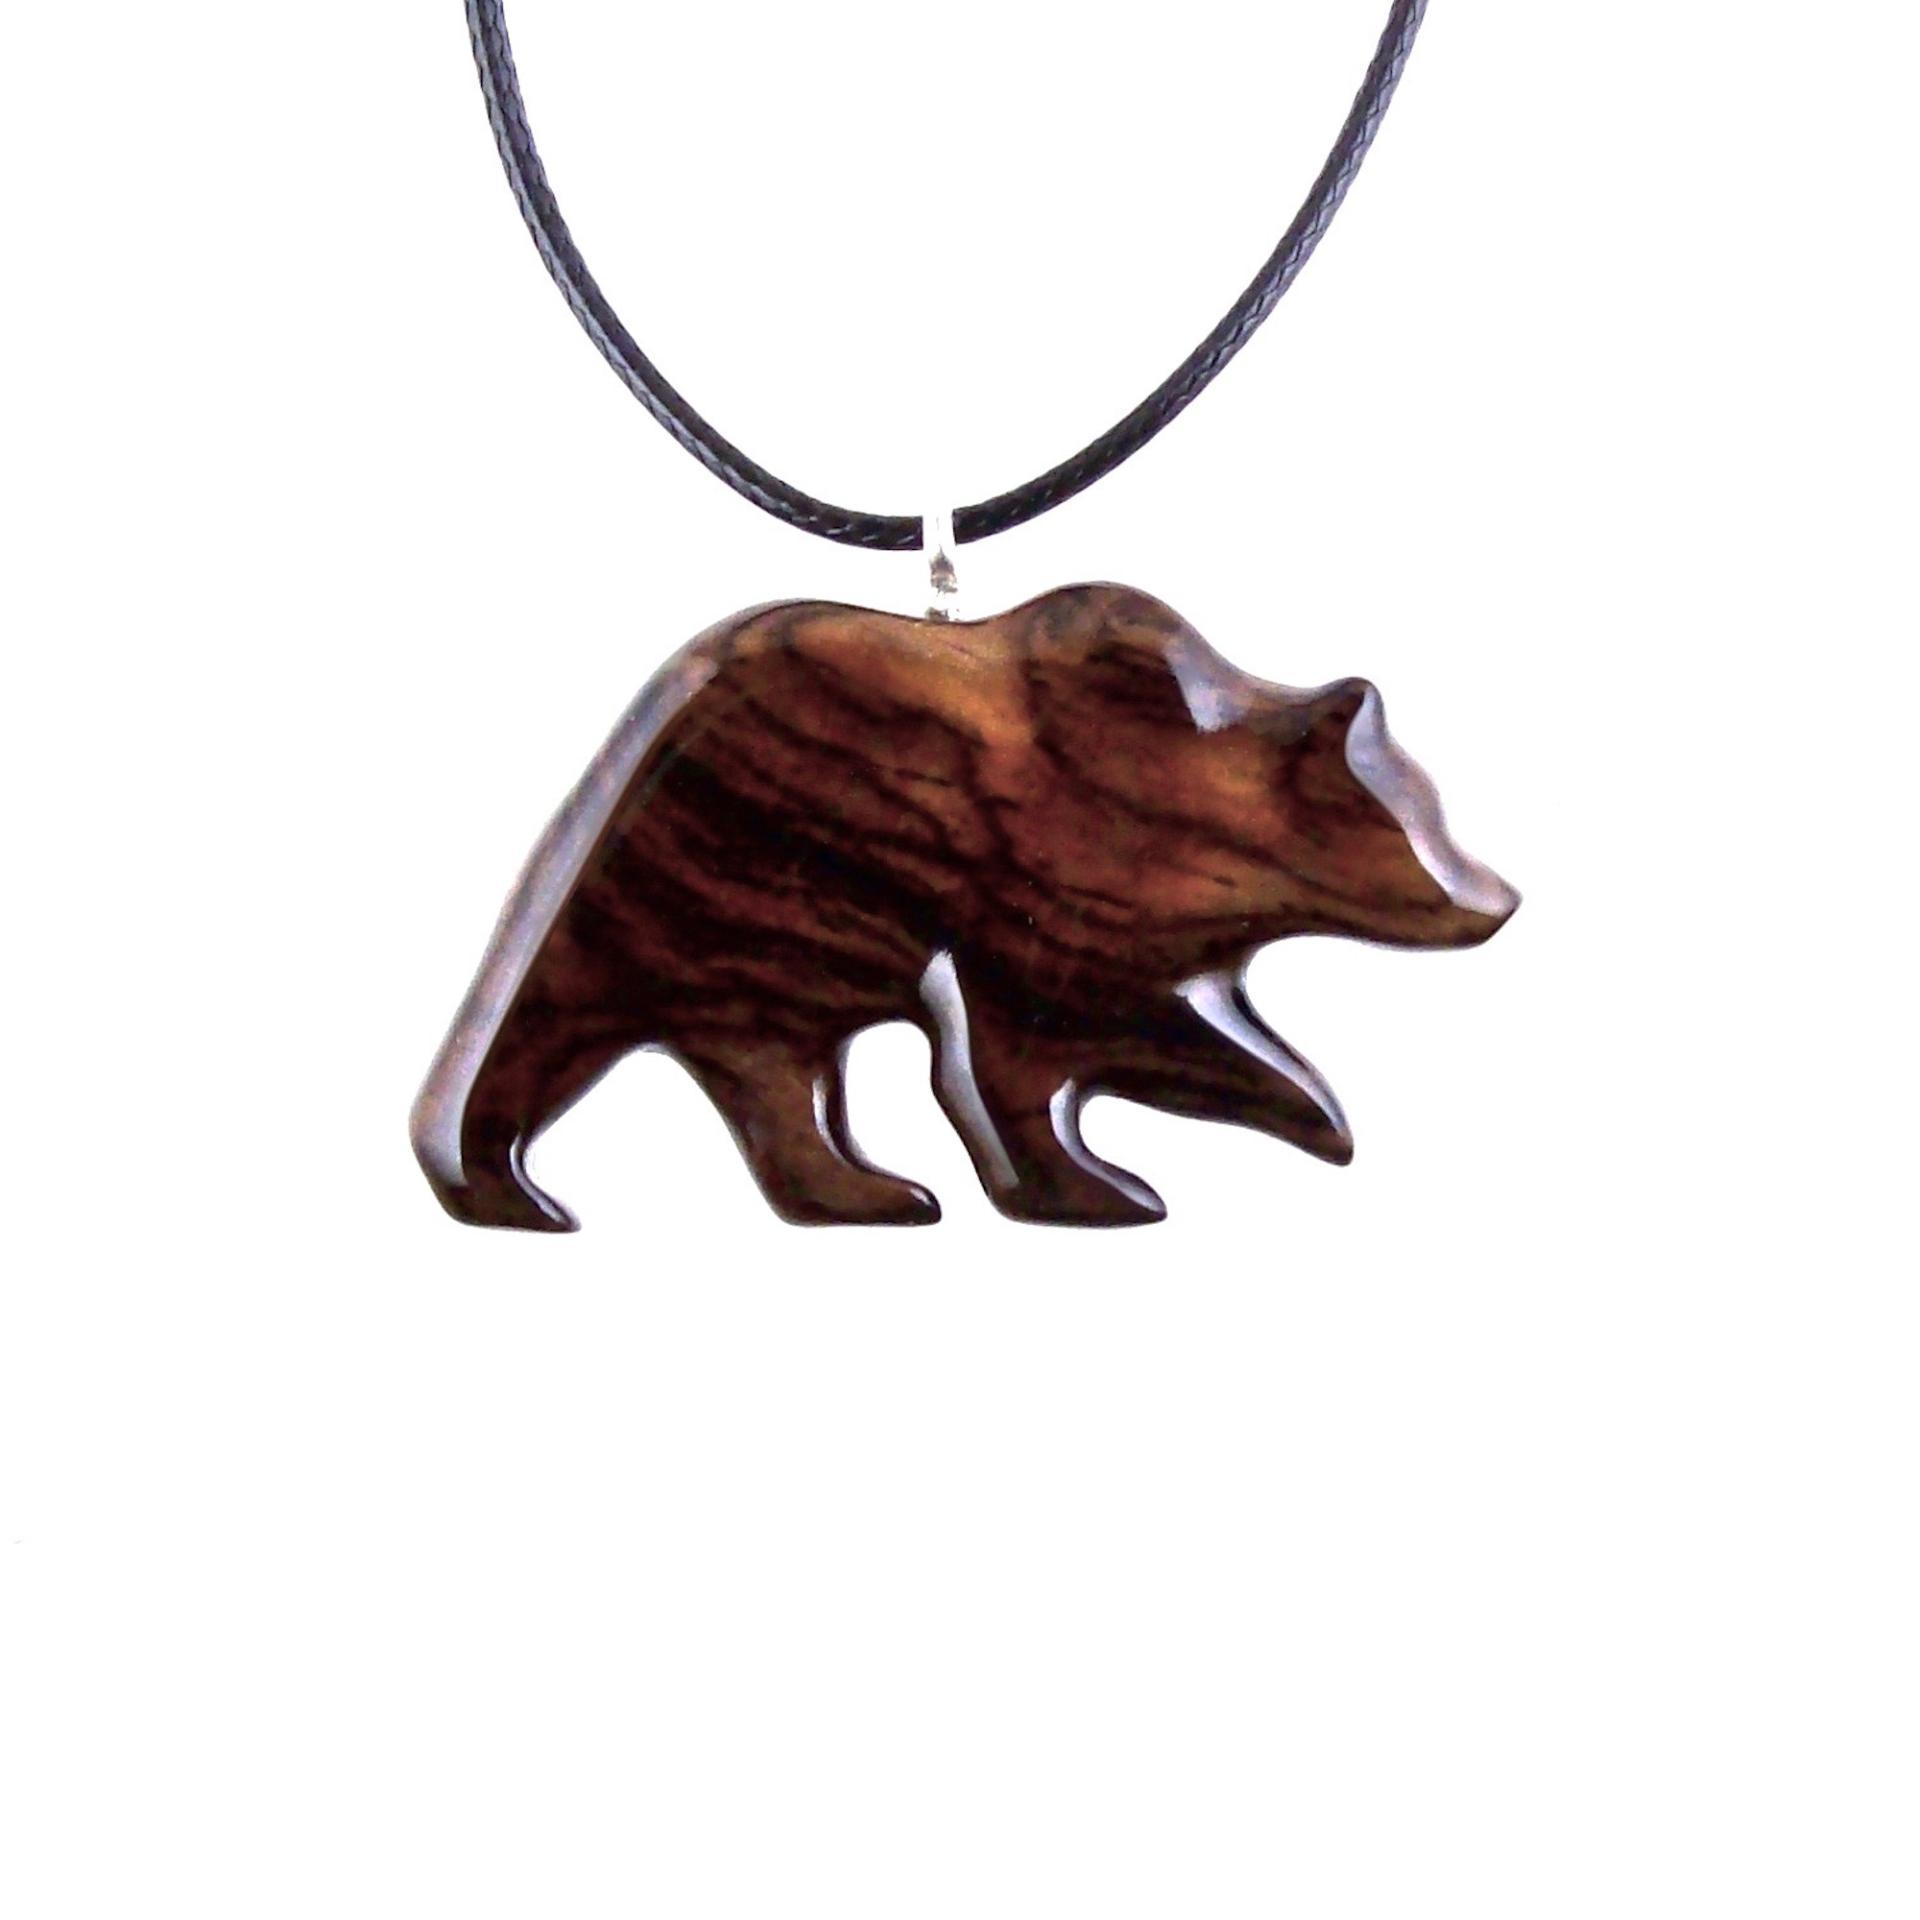 Wood Bear Necklace, Hand Carved Wooden Grizzly Bear Pendant for Men or Women, Spirit Animal Totem Jewelry Gift for Him Her